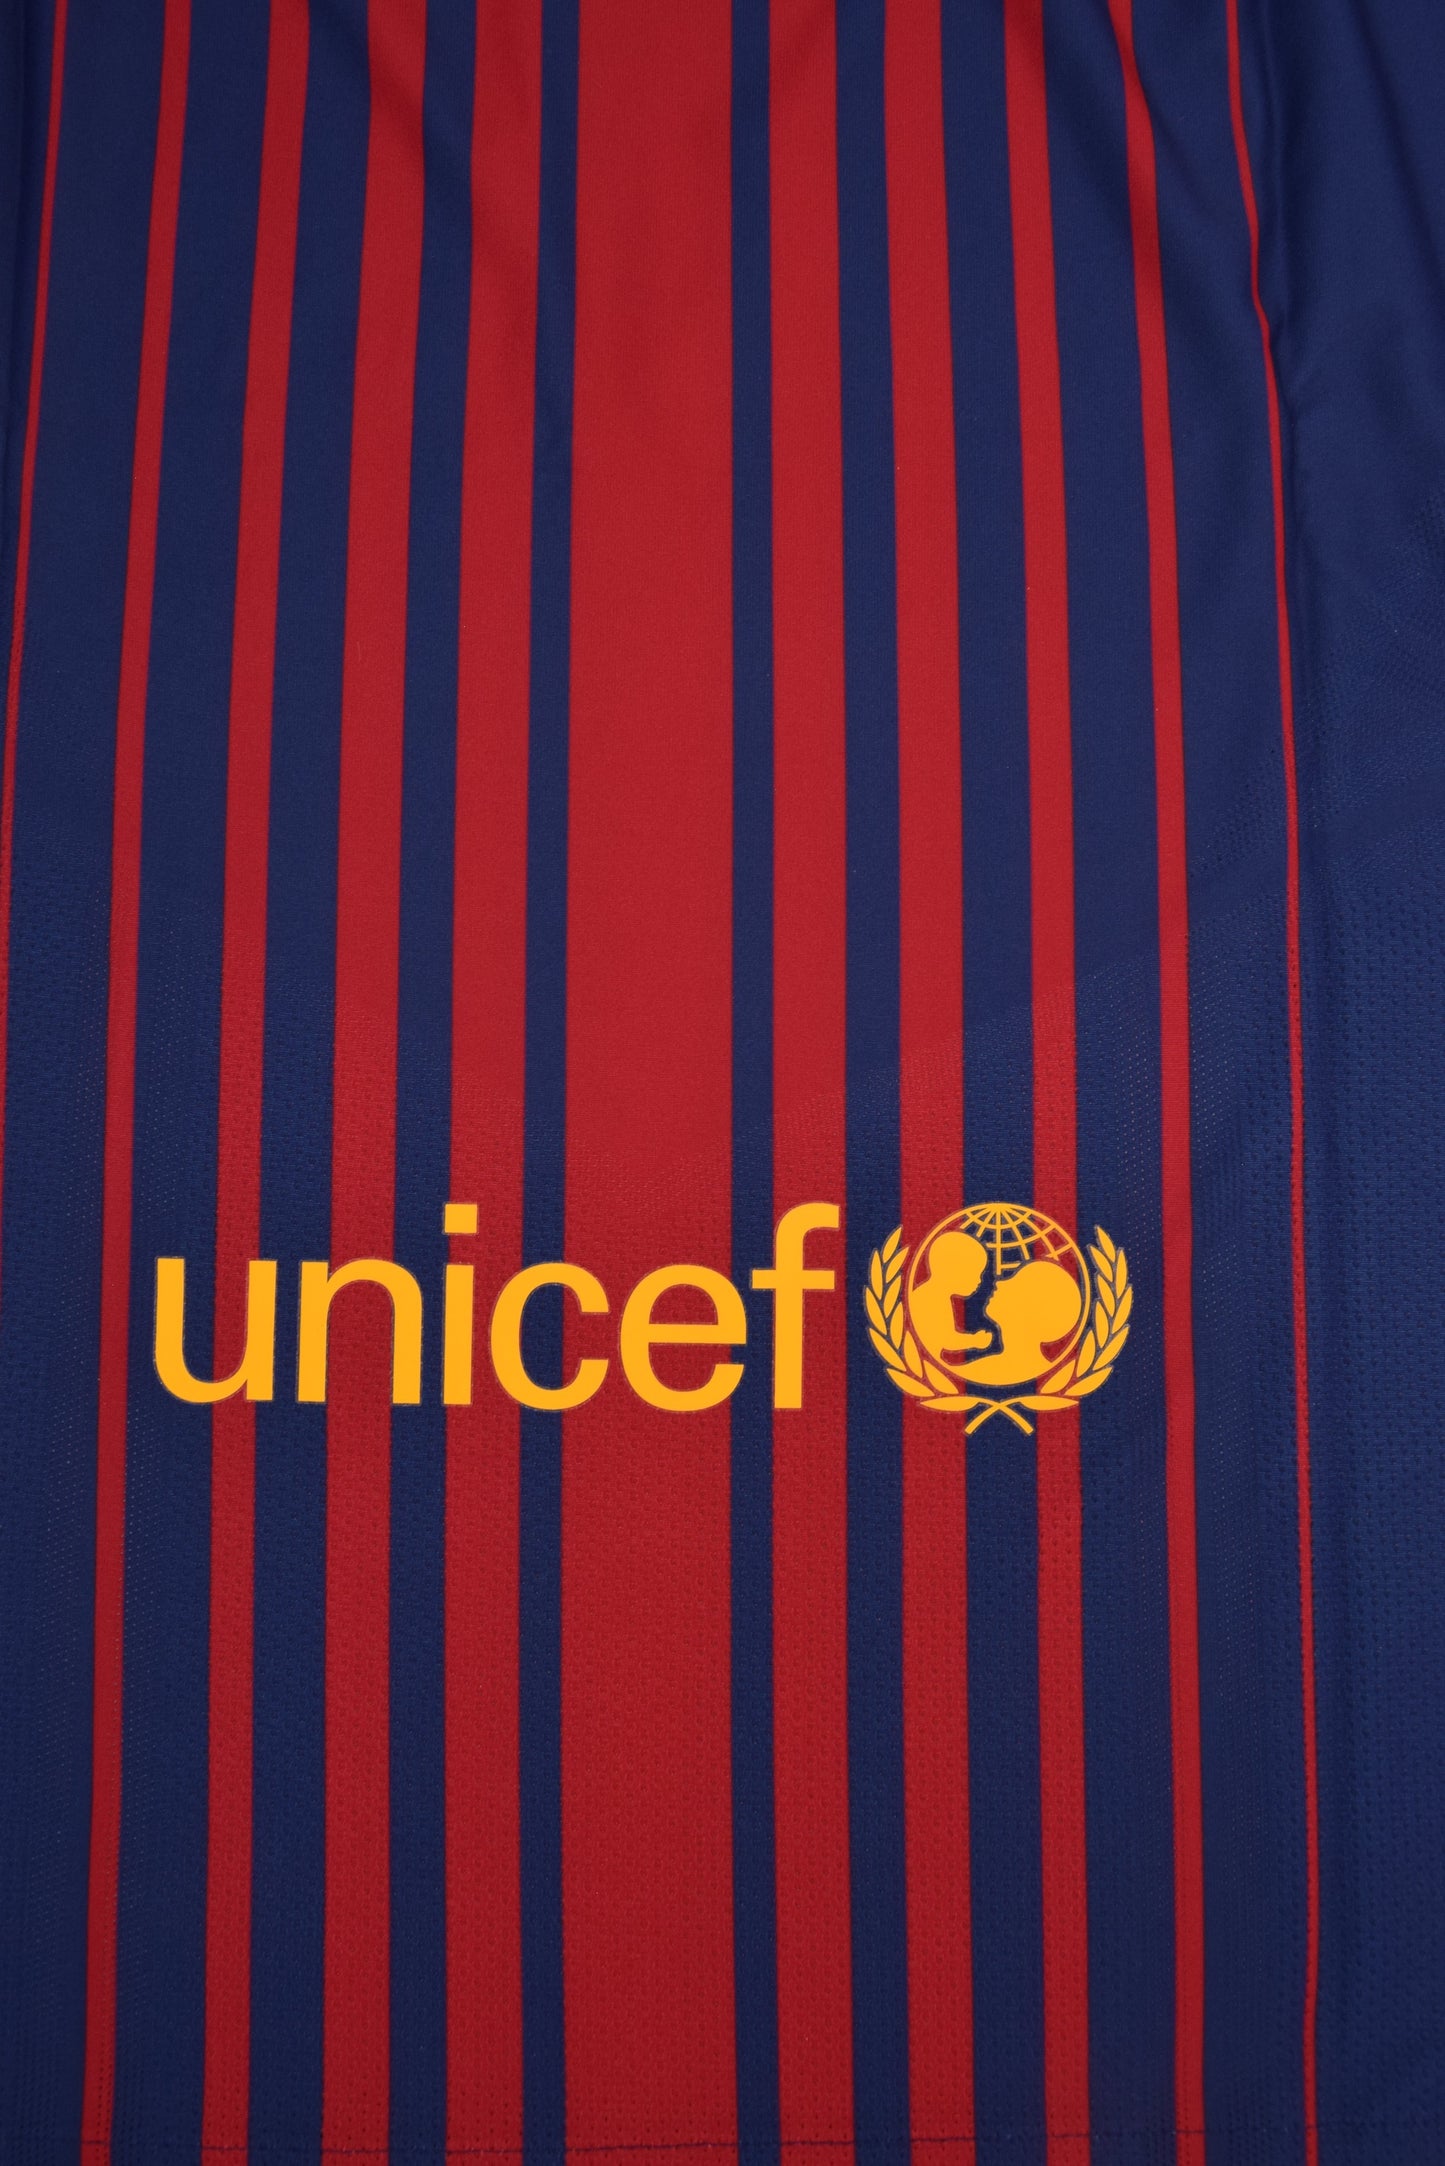 Authentic New FC Barcelona Nike Aeroswift Player Issue Home Football Shirt 2017-2018 Long Sleeves BNWT Deadstock Size L Red Blue Rakuten Unicef